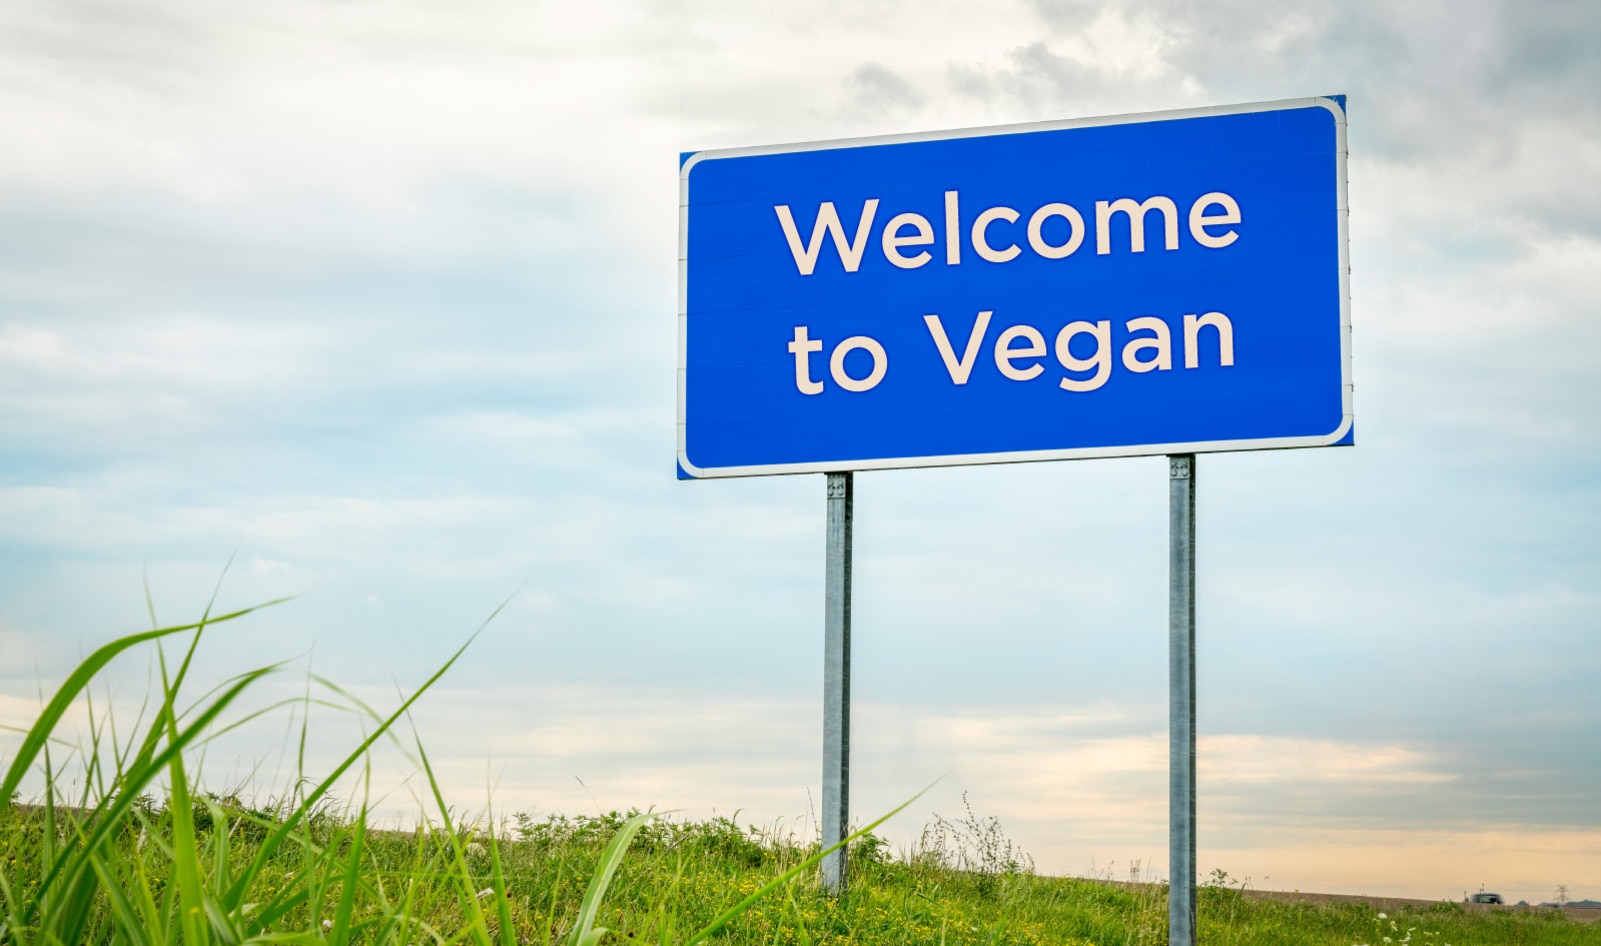 The US Is Getting a National Vegan Welcome Center